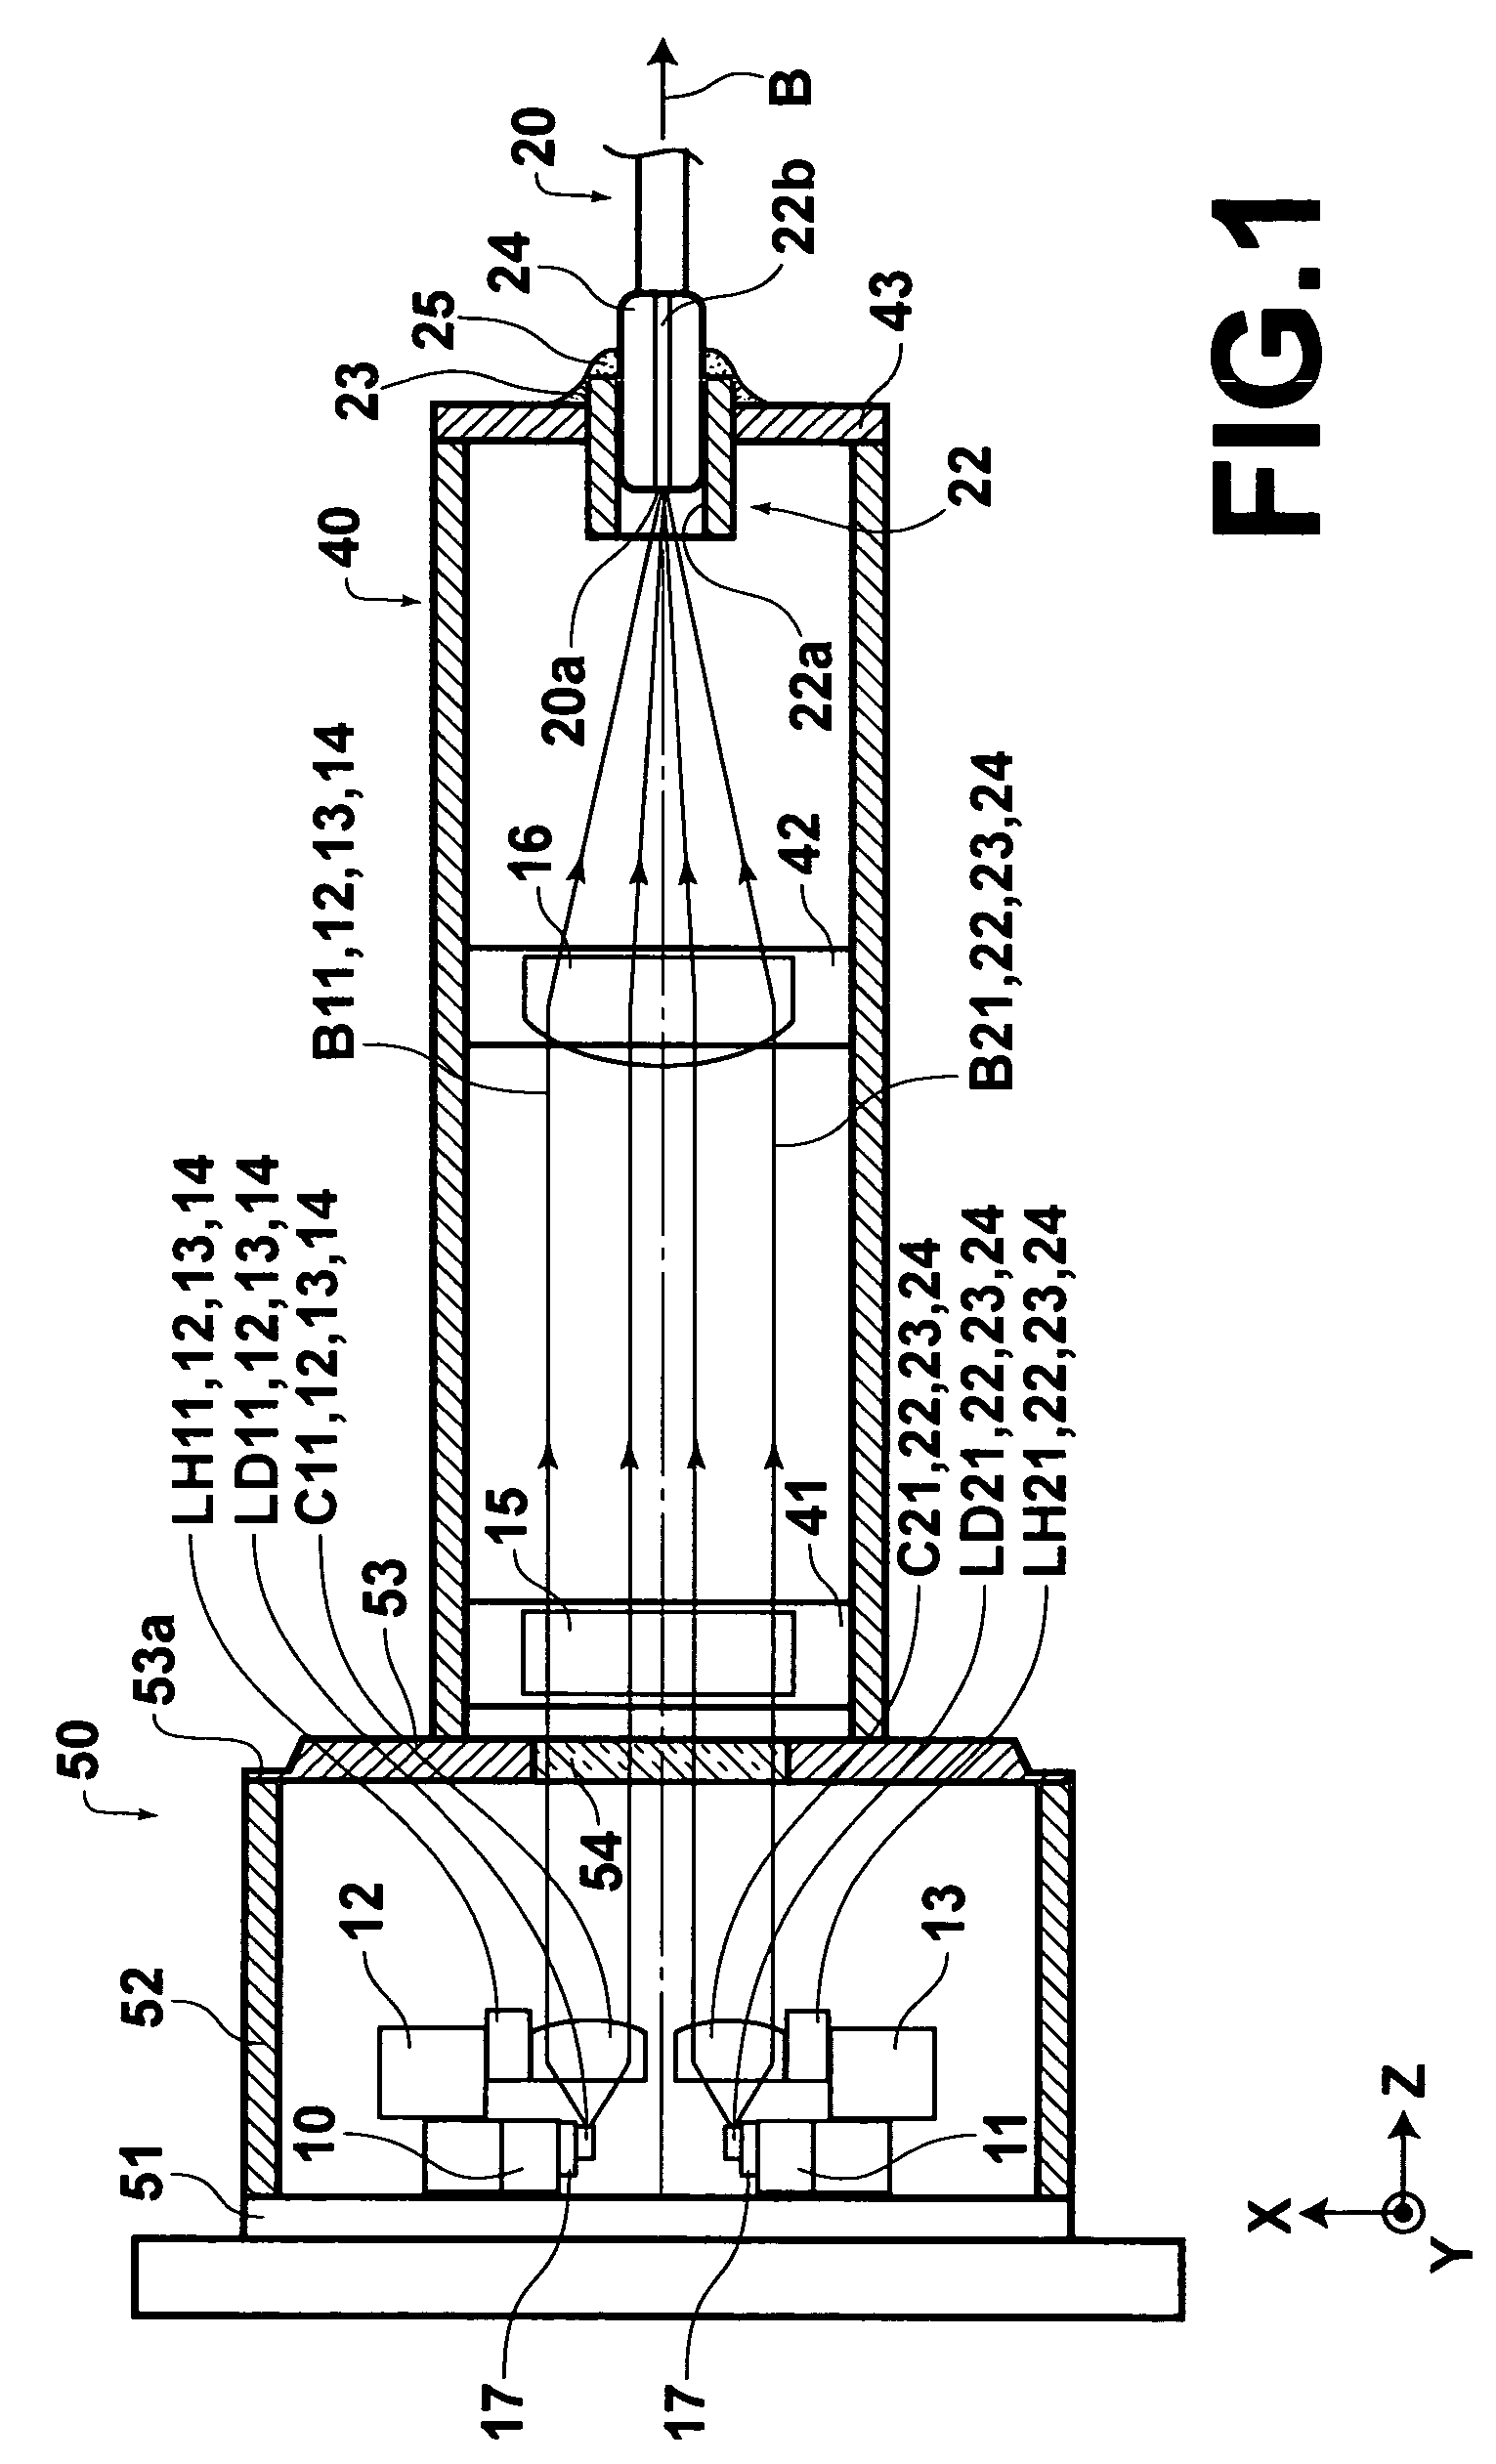 Laser module with sealed packages having reduced total volume